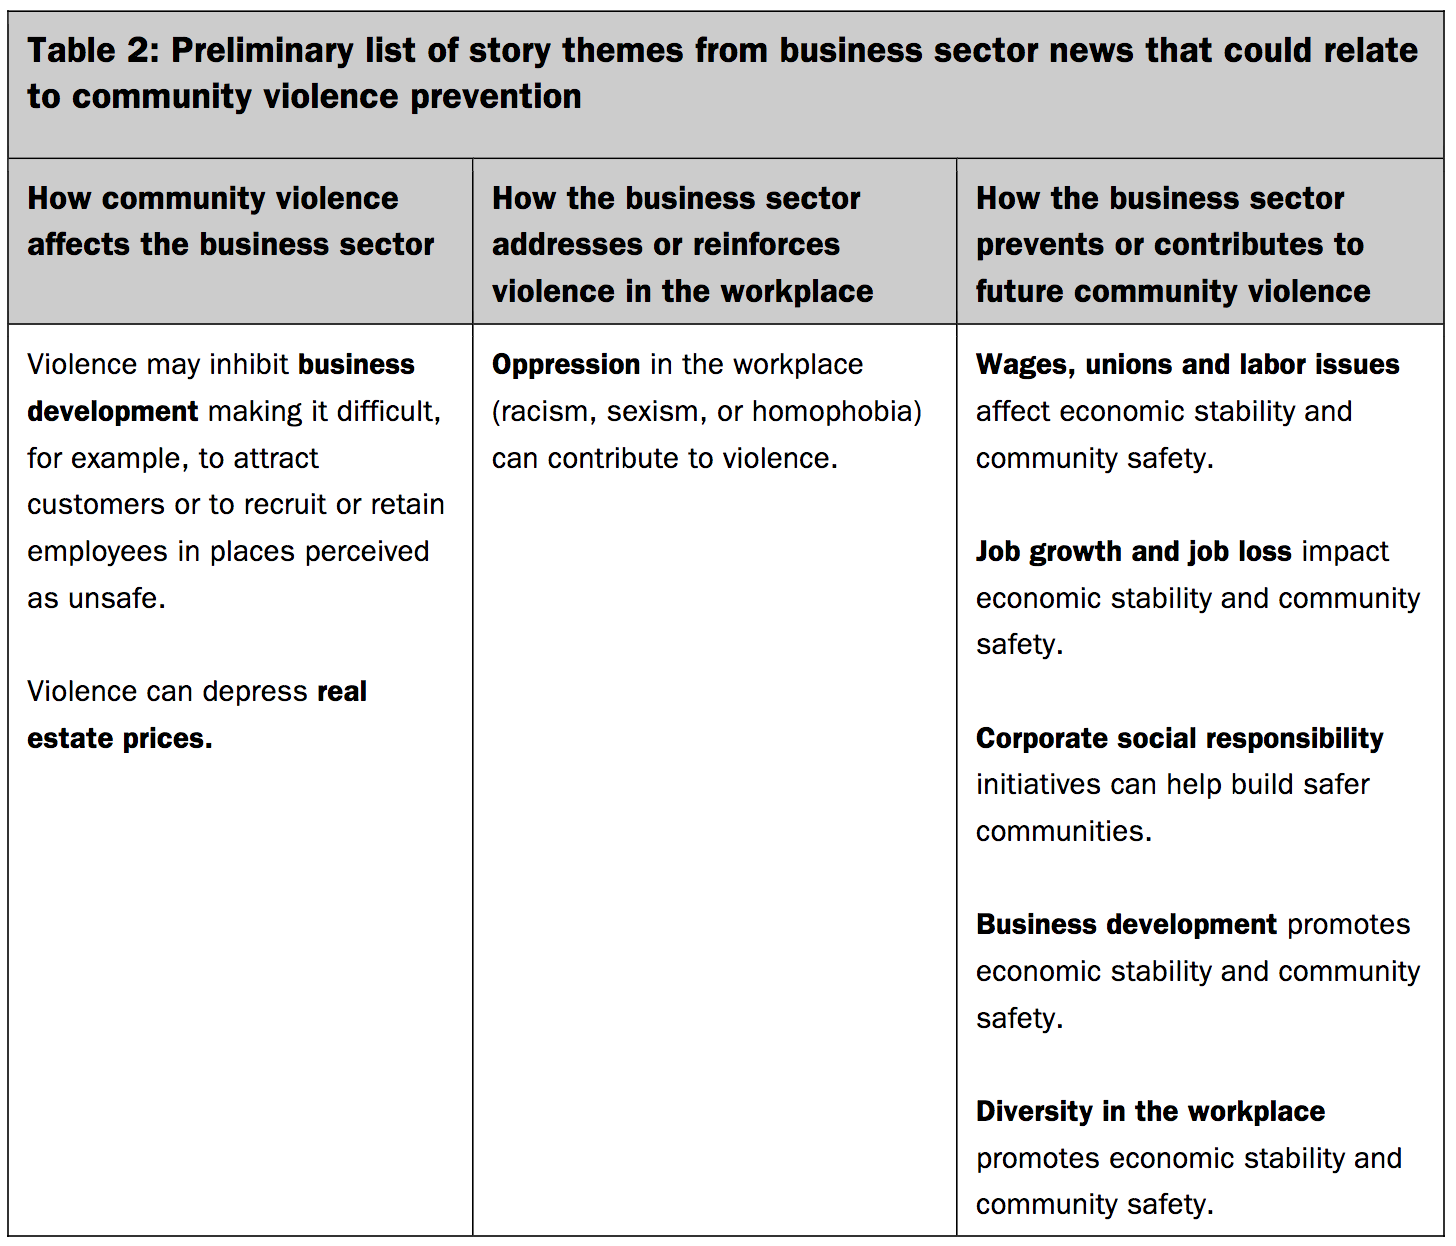 table 2: story themes from business sector